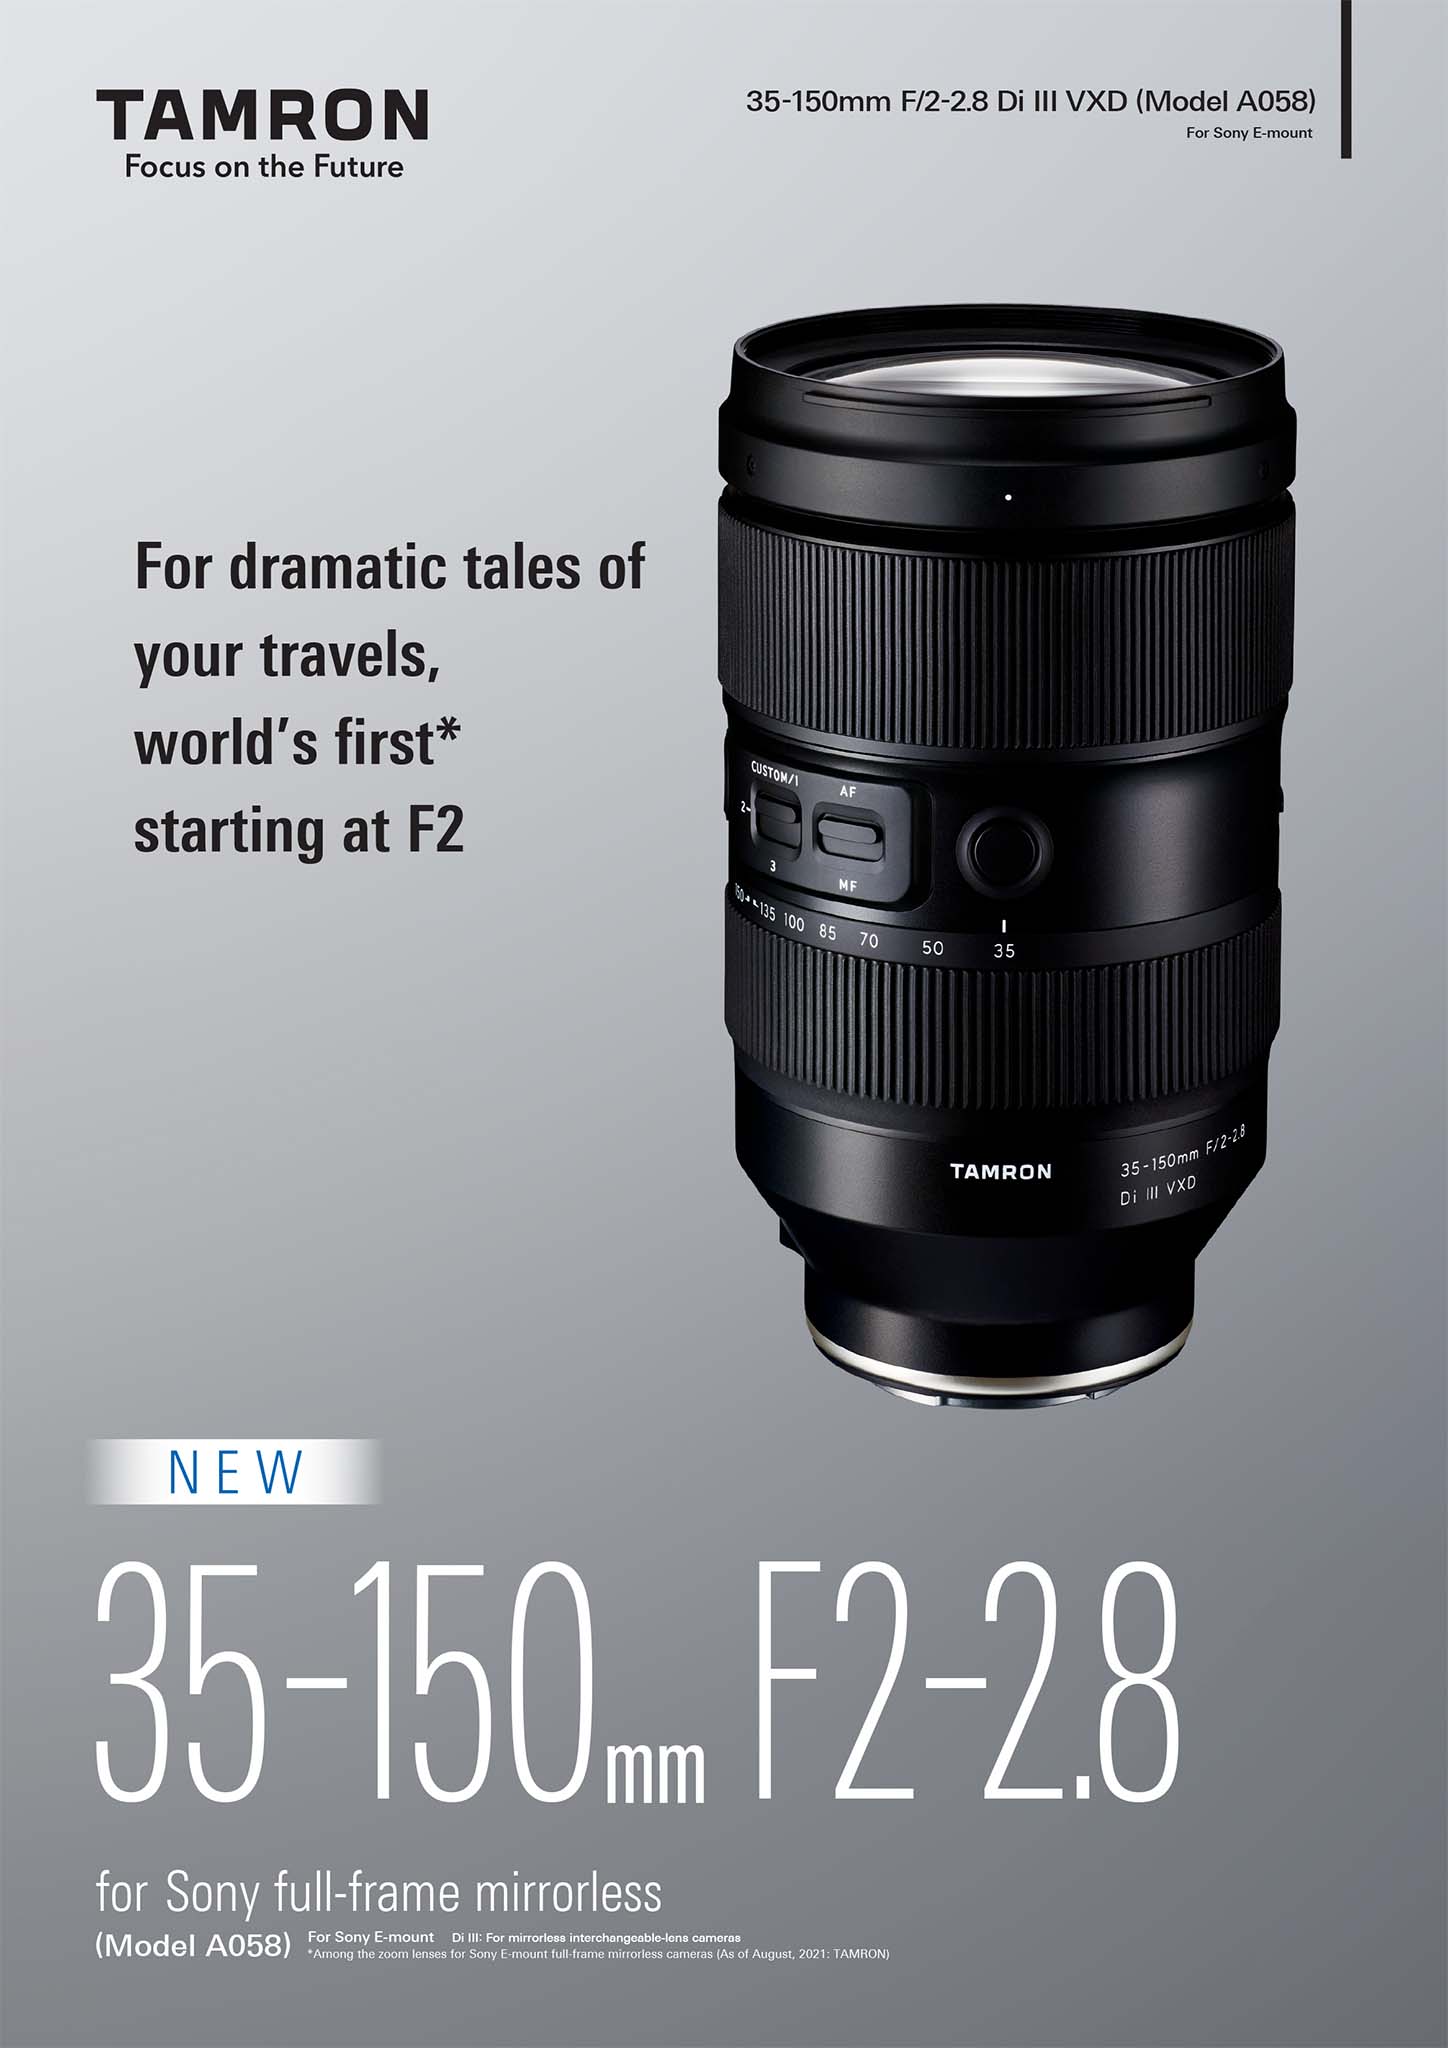 More leaked information on the two upcoming Tamron lenses (35